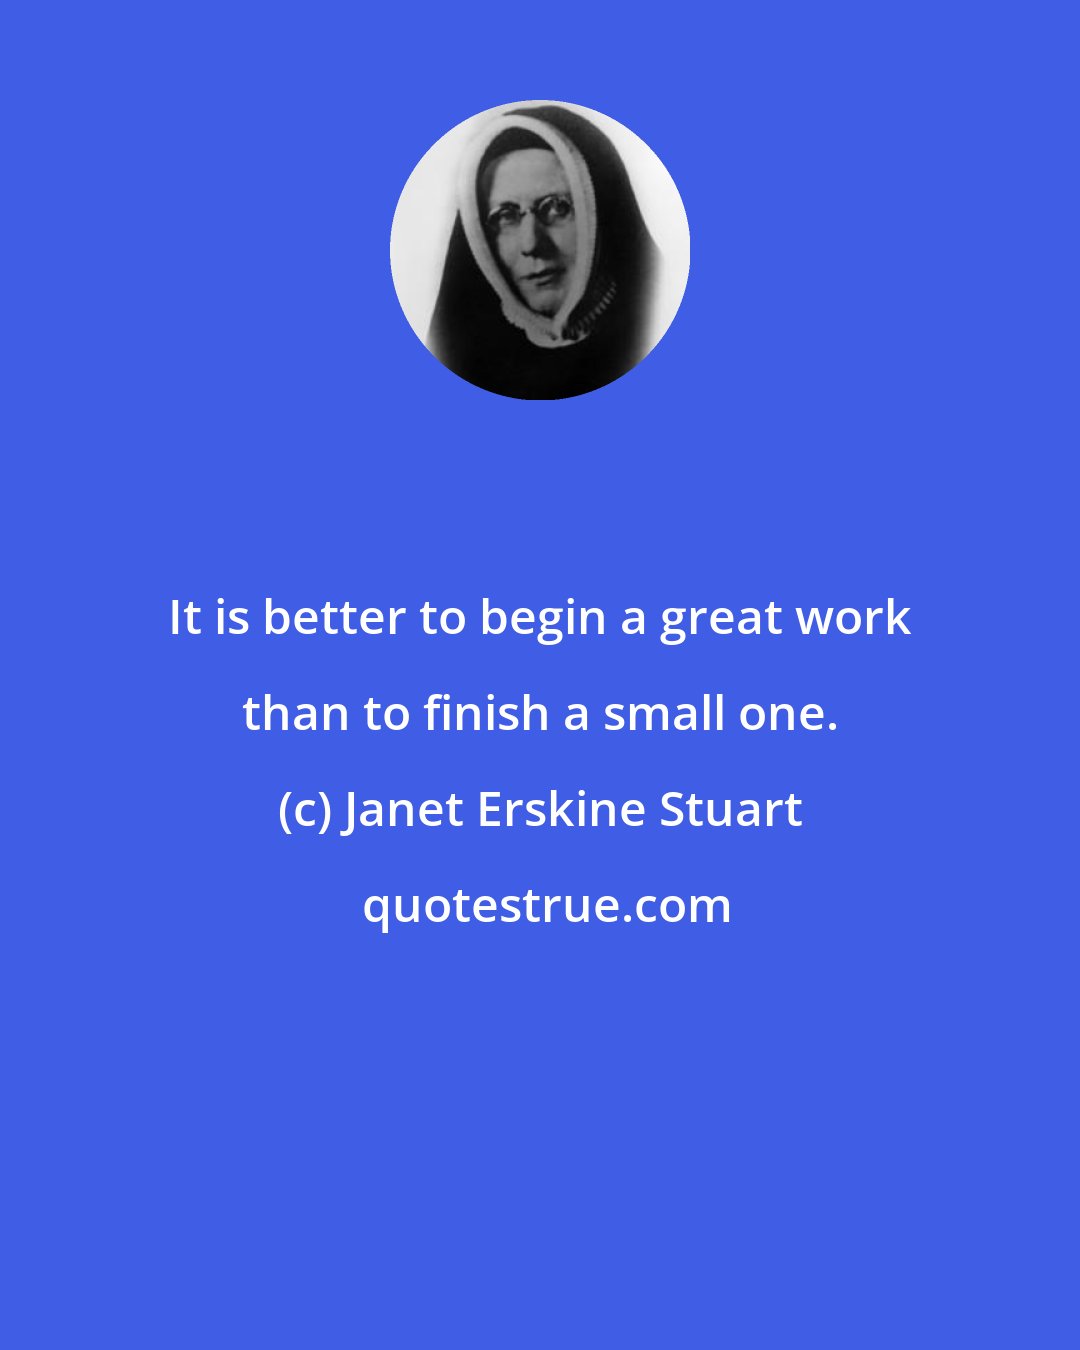 Janet Erskine Stuart: It is better to begin a great work than to finish a small one.